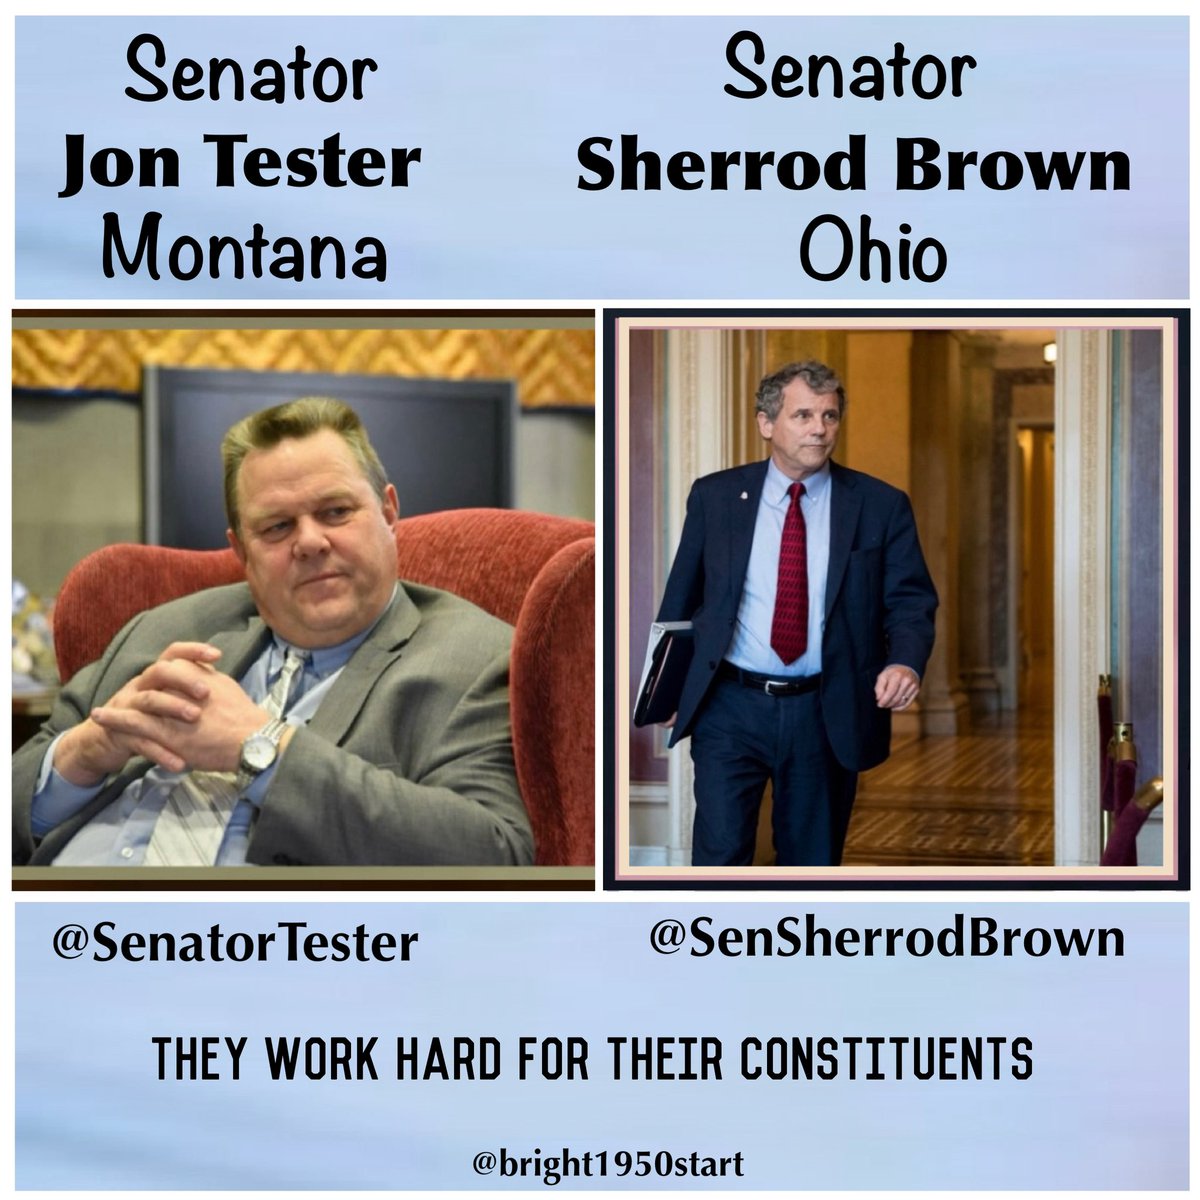 Sherrod Brown  and Jon Tester are vital to the fight for our Democracy and for programs that benefit everyday Americans

@SherrodBrown
Ohio
secure.actblue.com/donate/sherrod…

@Jontester
Montana
secure.actblue.com/donate/rjt-ads…

#DemVoice1 #LiveBlue #ResistanceUnited #ONEV1